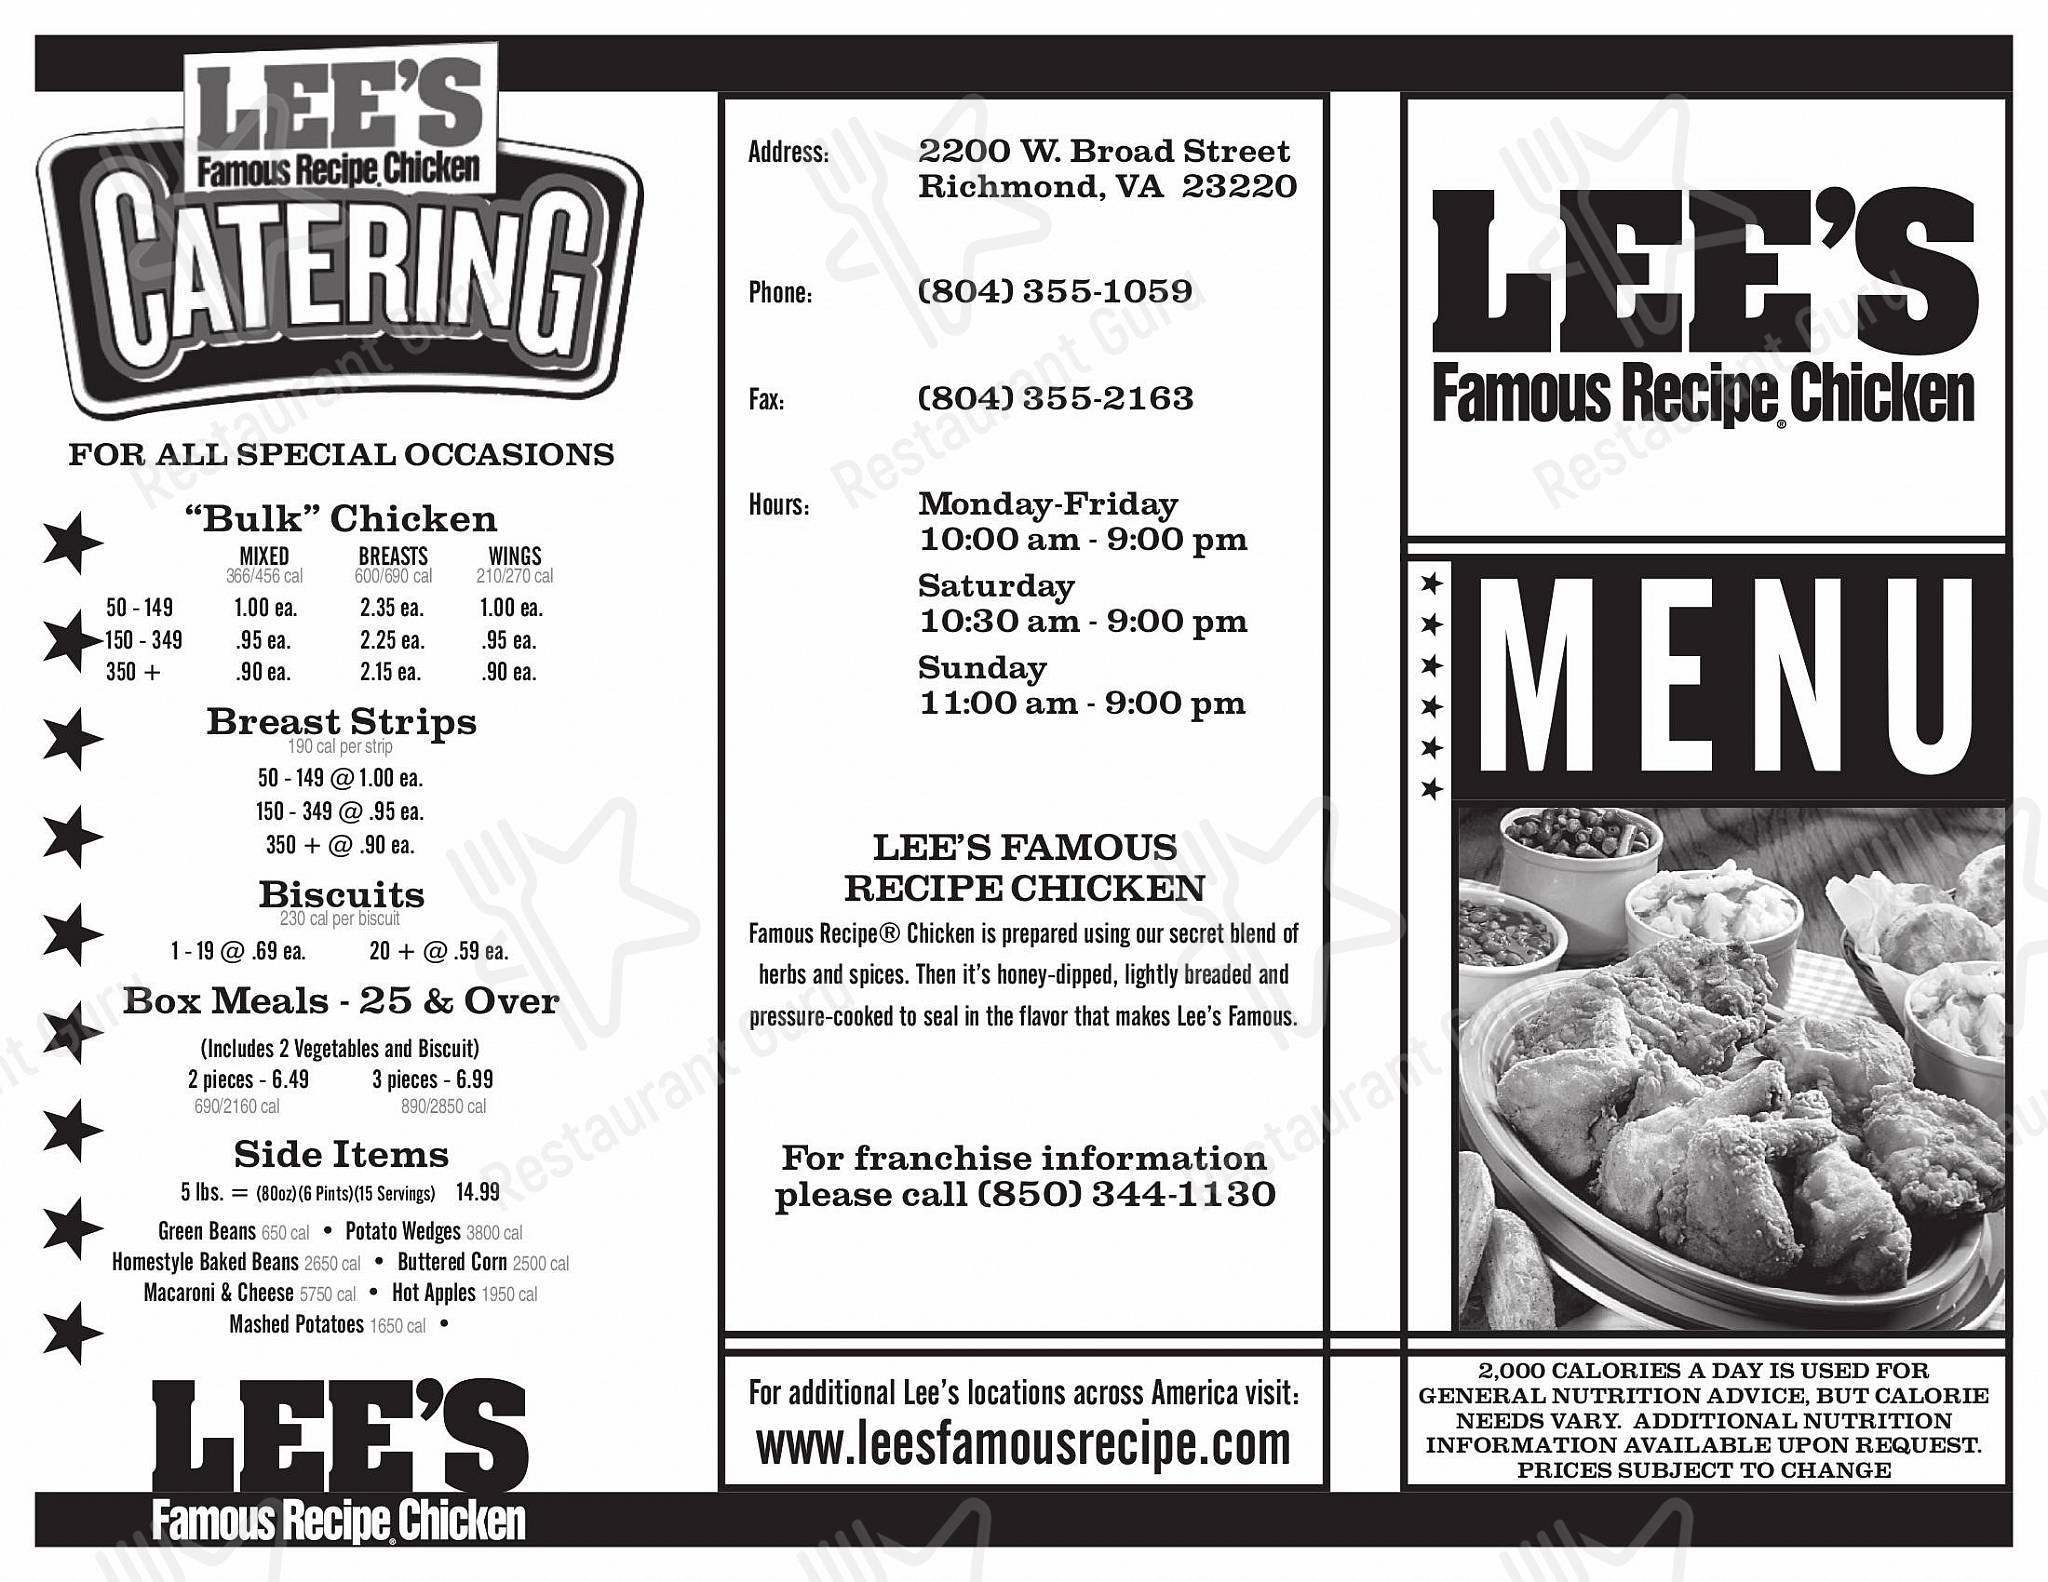 Menu at Lee's Famous Recipe Chicken fast food, Richmond